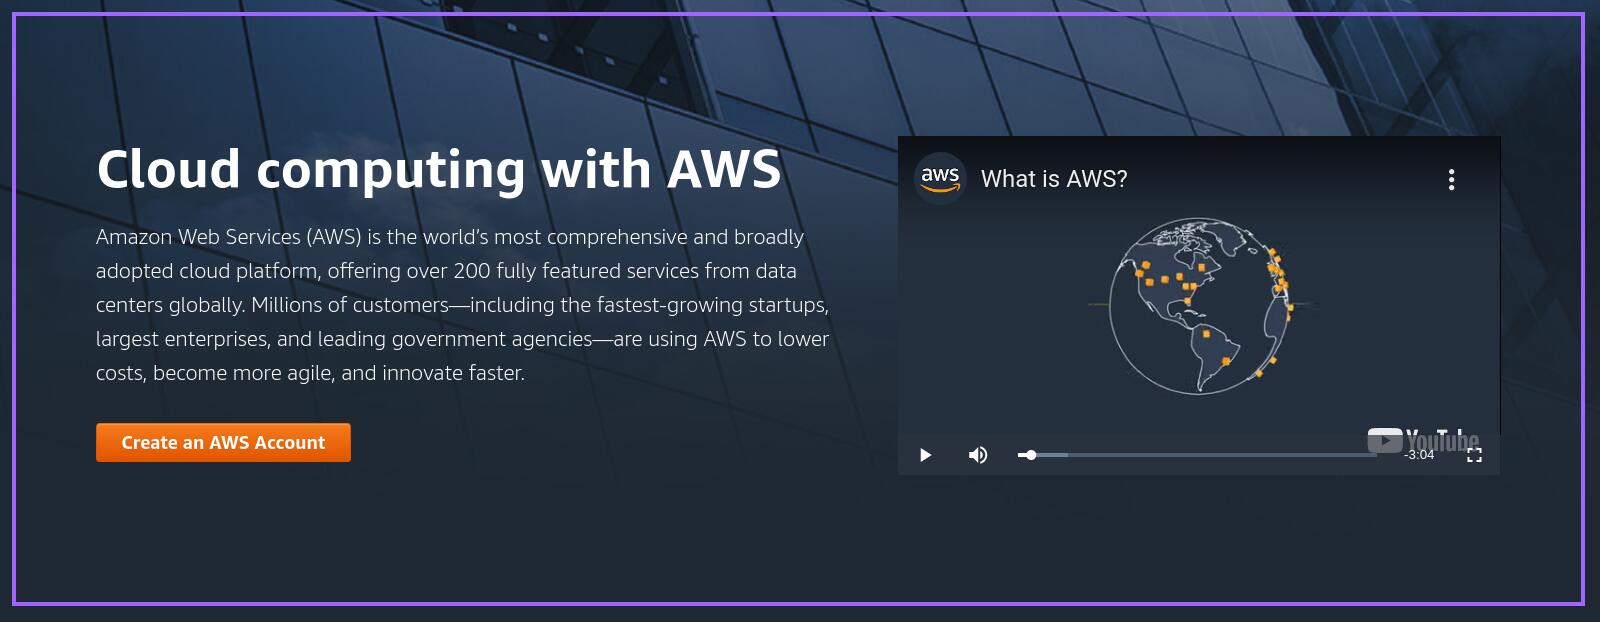 cloud computer with aws webpage screenshot graphic